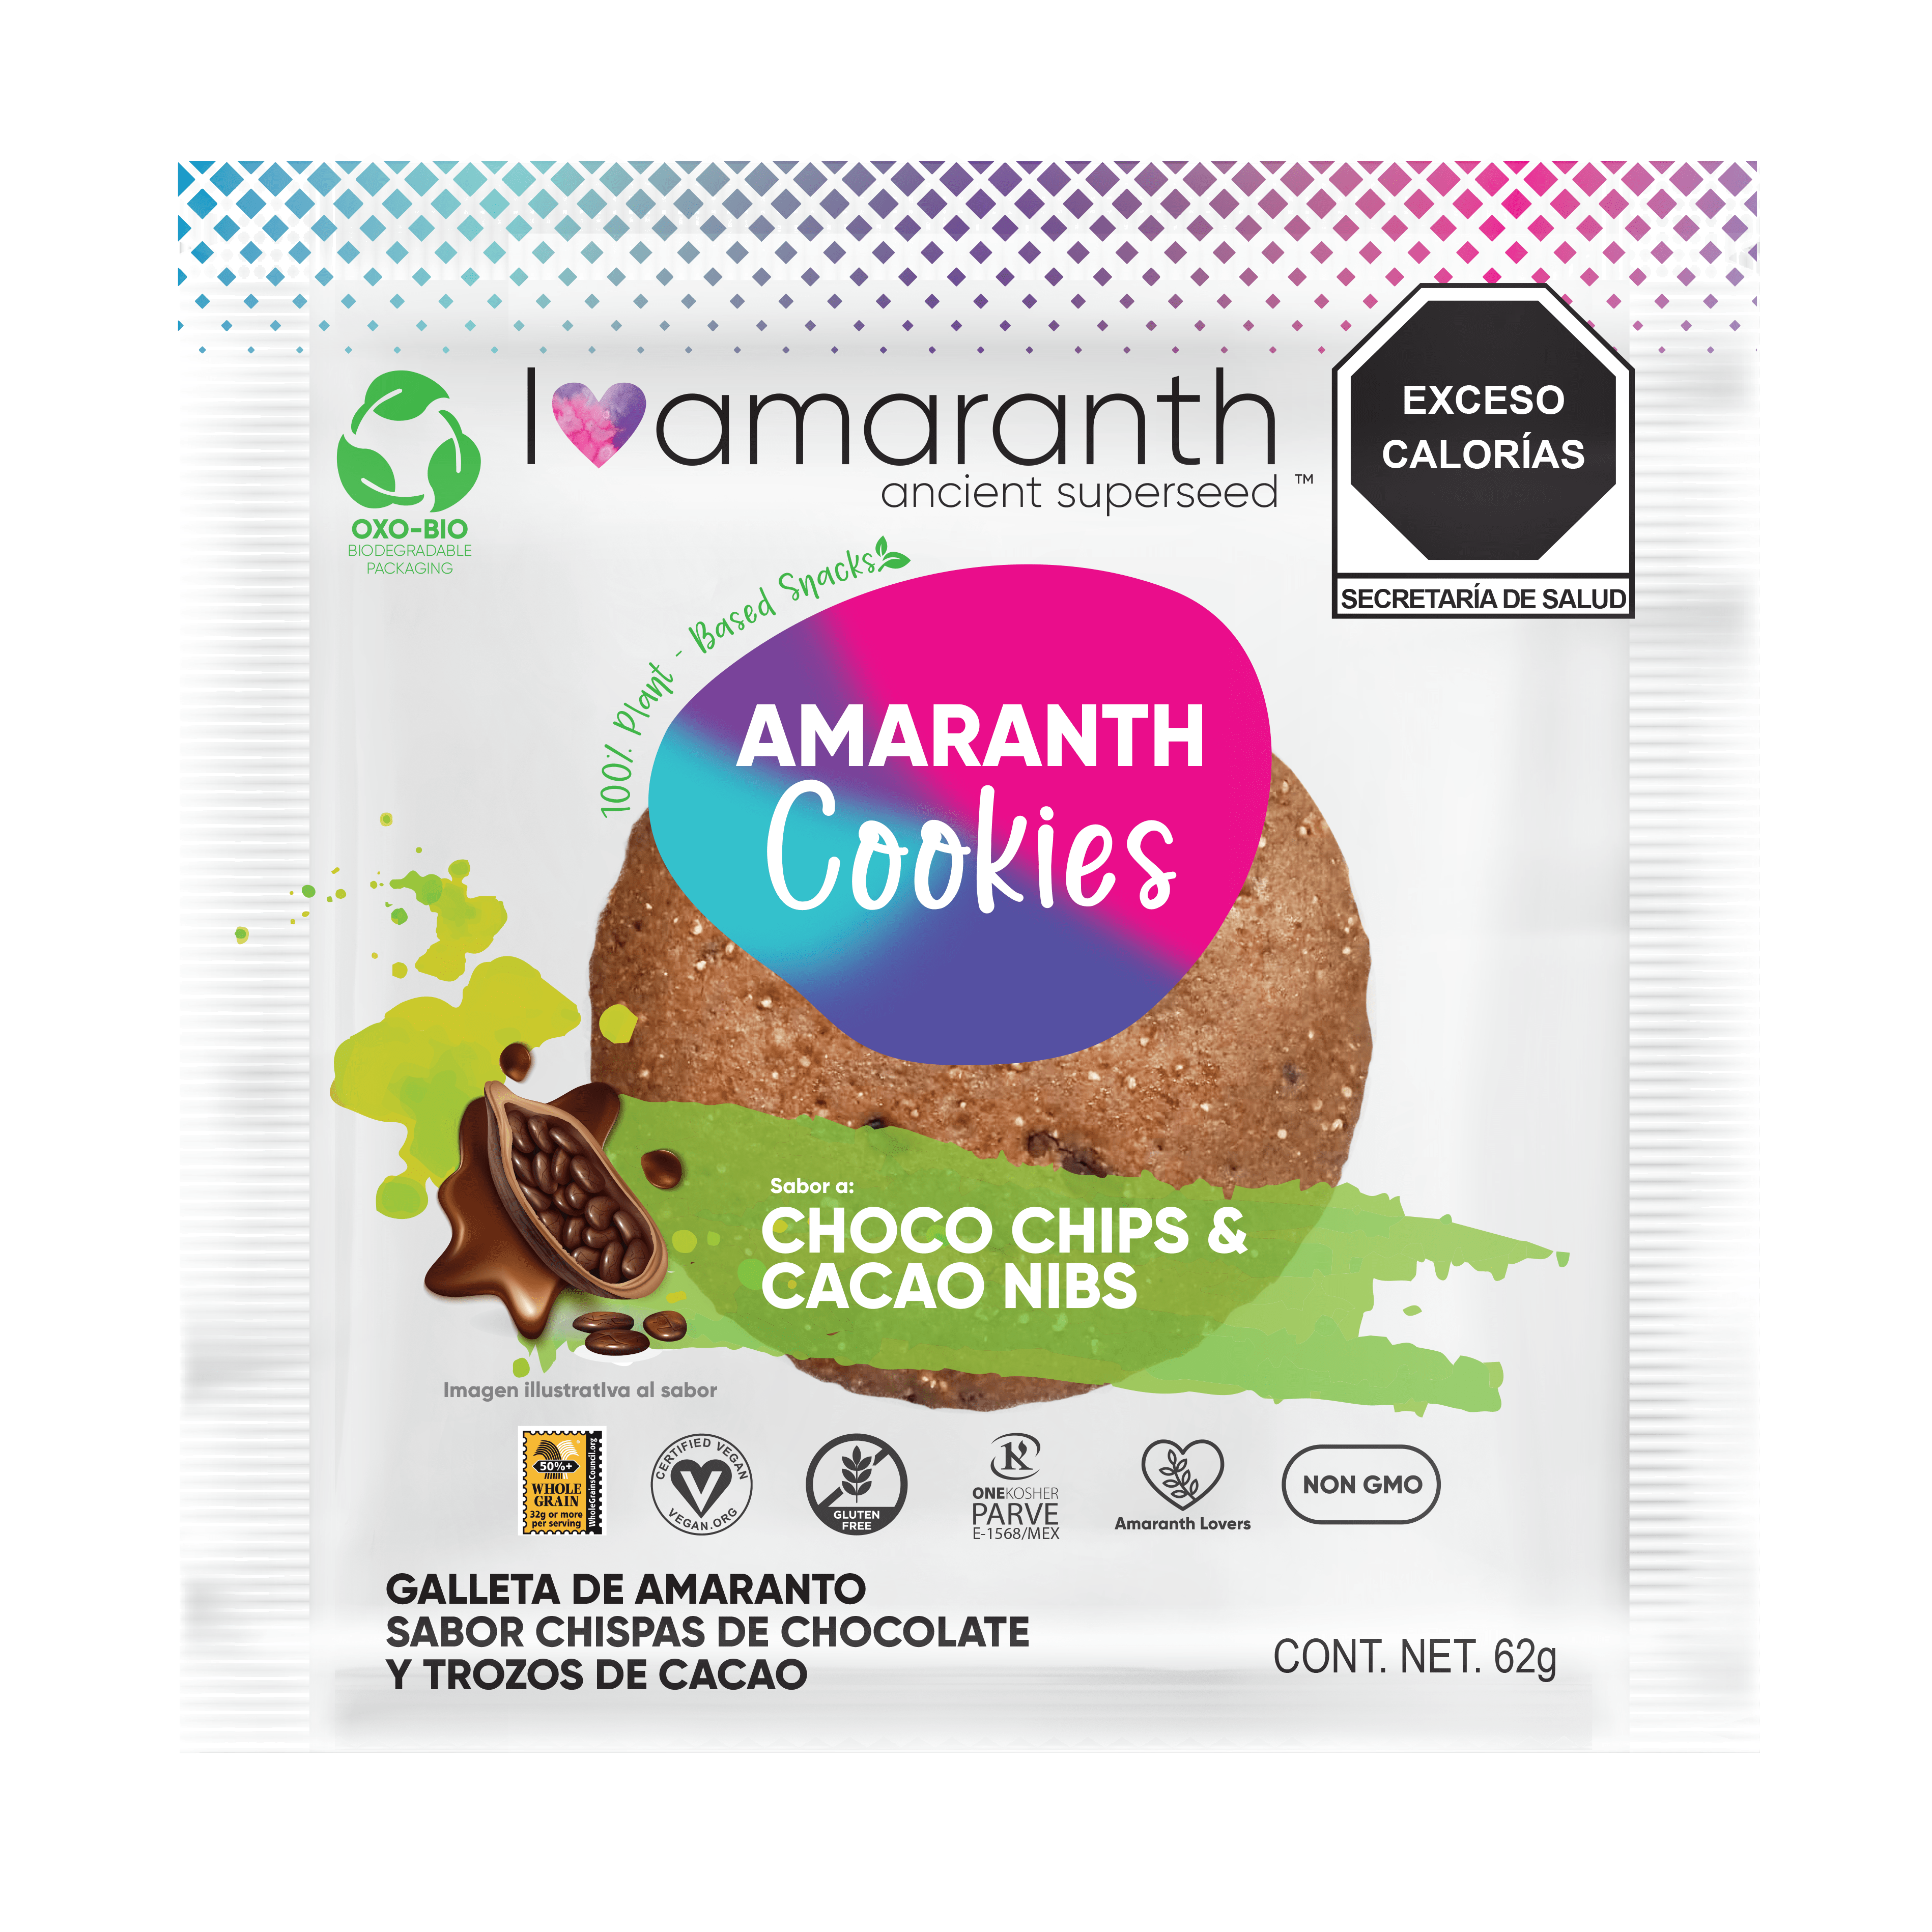 Amaranth Cookies - Choco Chips & Cacao Nibs